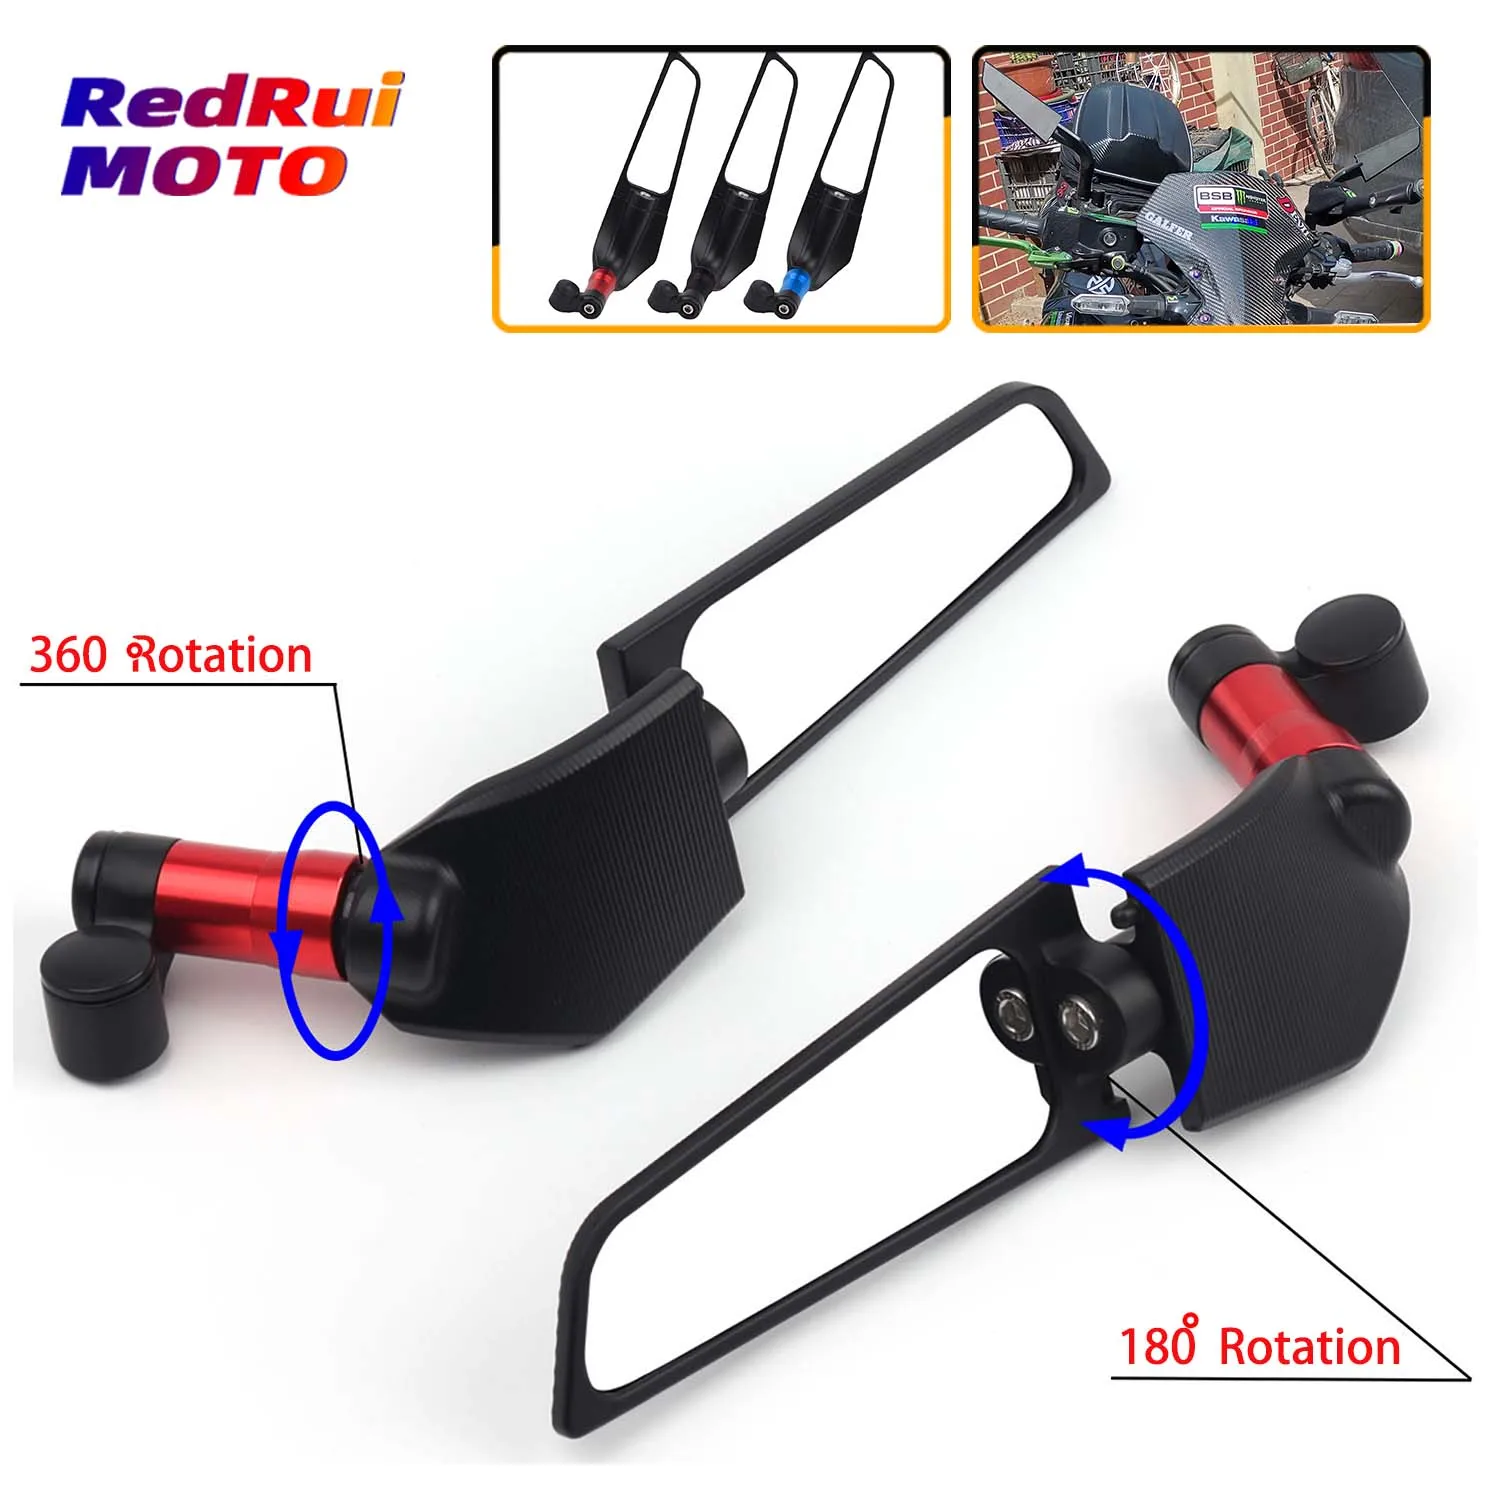 

Universal New fixed wind wing for Kawasaki Z750R Z750S Z1000 J300 ER6N ER-6N W800 ZRX1200 motorcycle Rotating rearview mirror